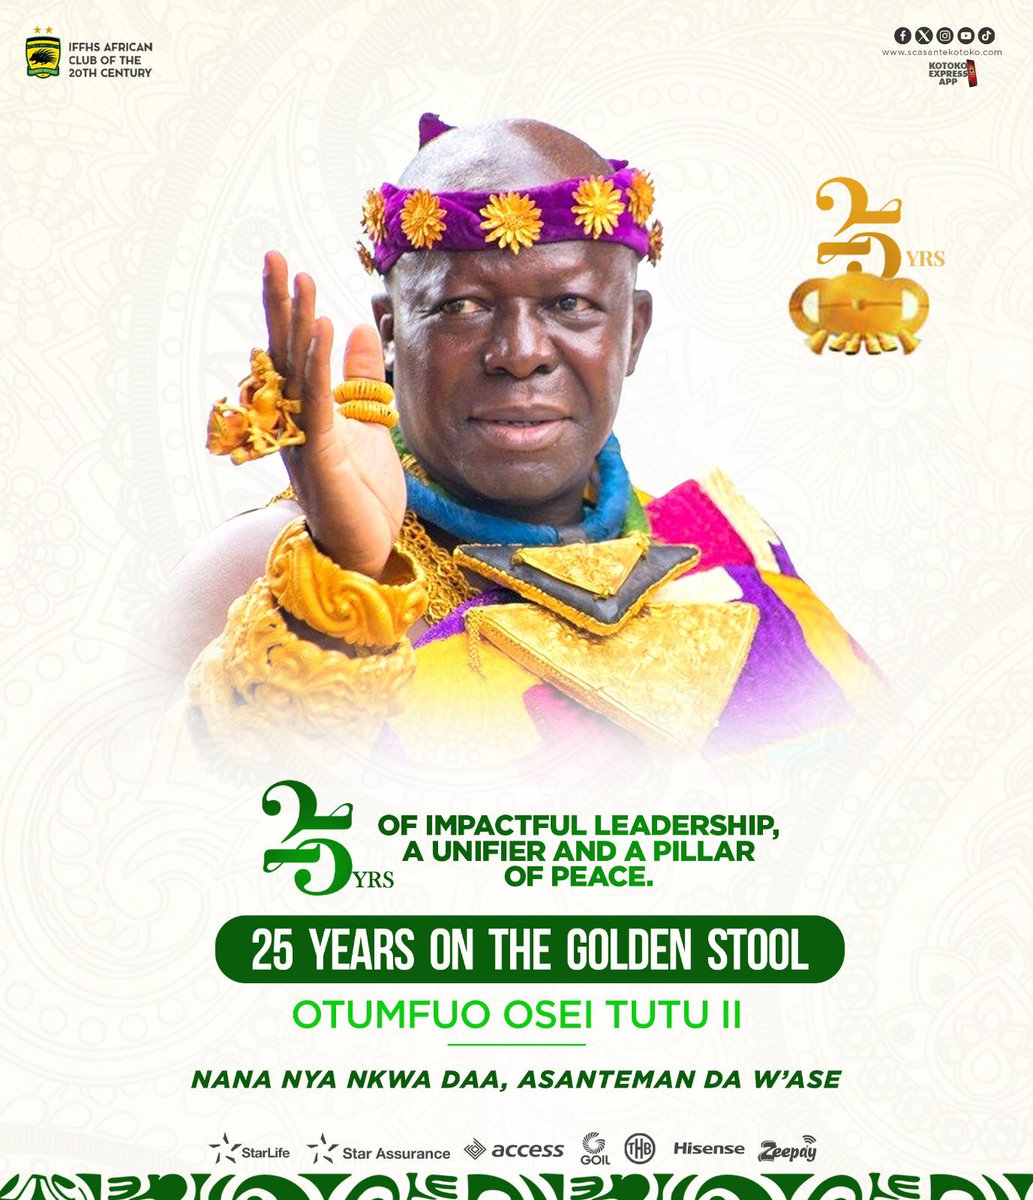 We celebrate 25 years of exemplary excellence, of unity and oneness.

Yɛn wura, wo som yɛn bo. 

Long may you REIGN 🙏👑

#SILVERJUBILEE
#AKSC #Fabucensus #Kotoko4All